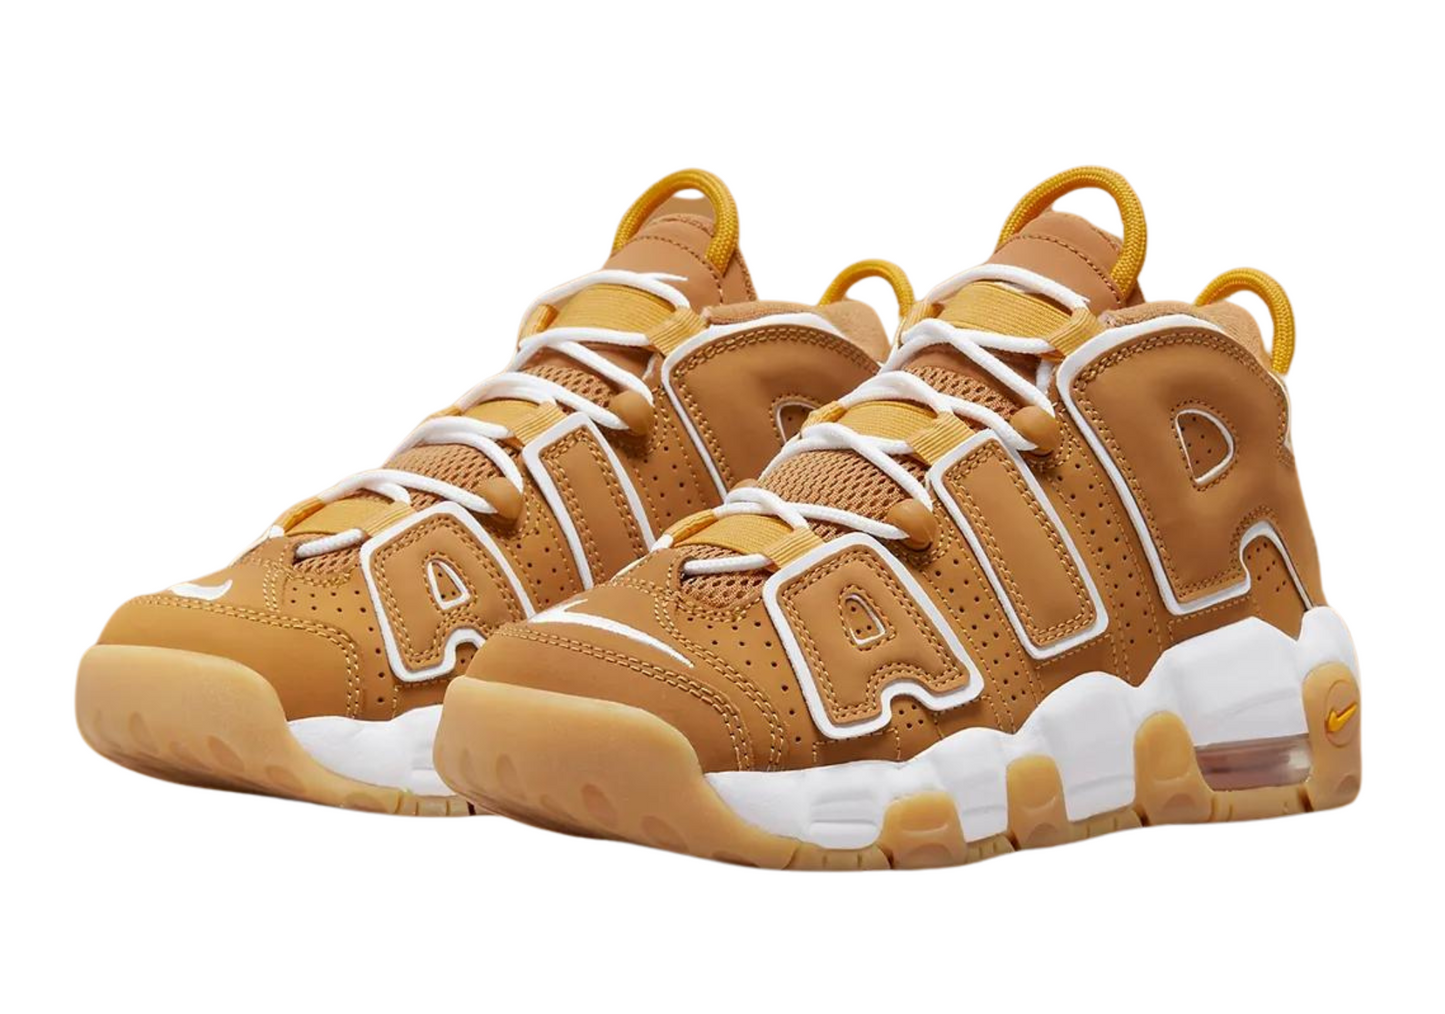 Nike Air More Uptempo “Wheat” GS